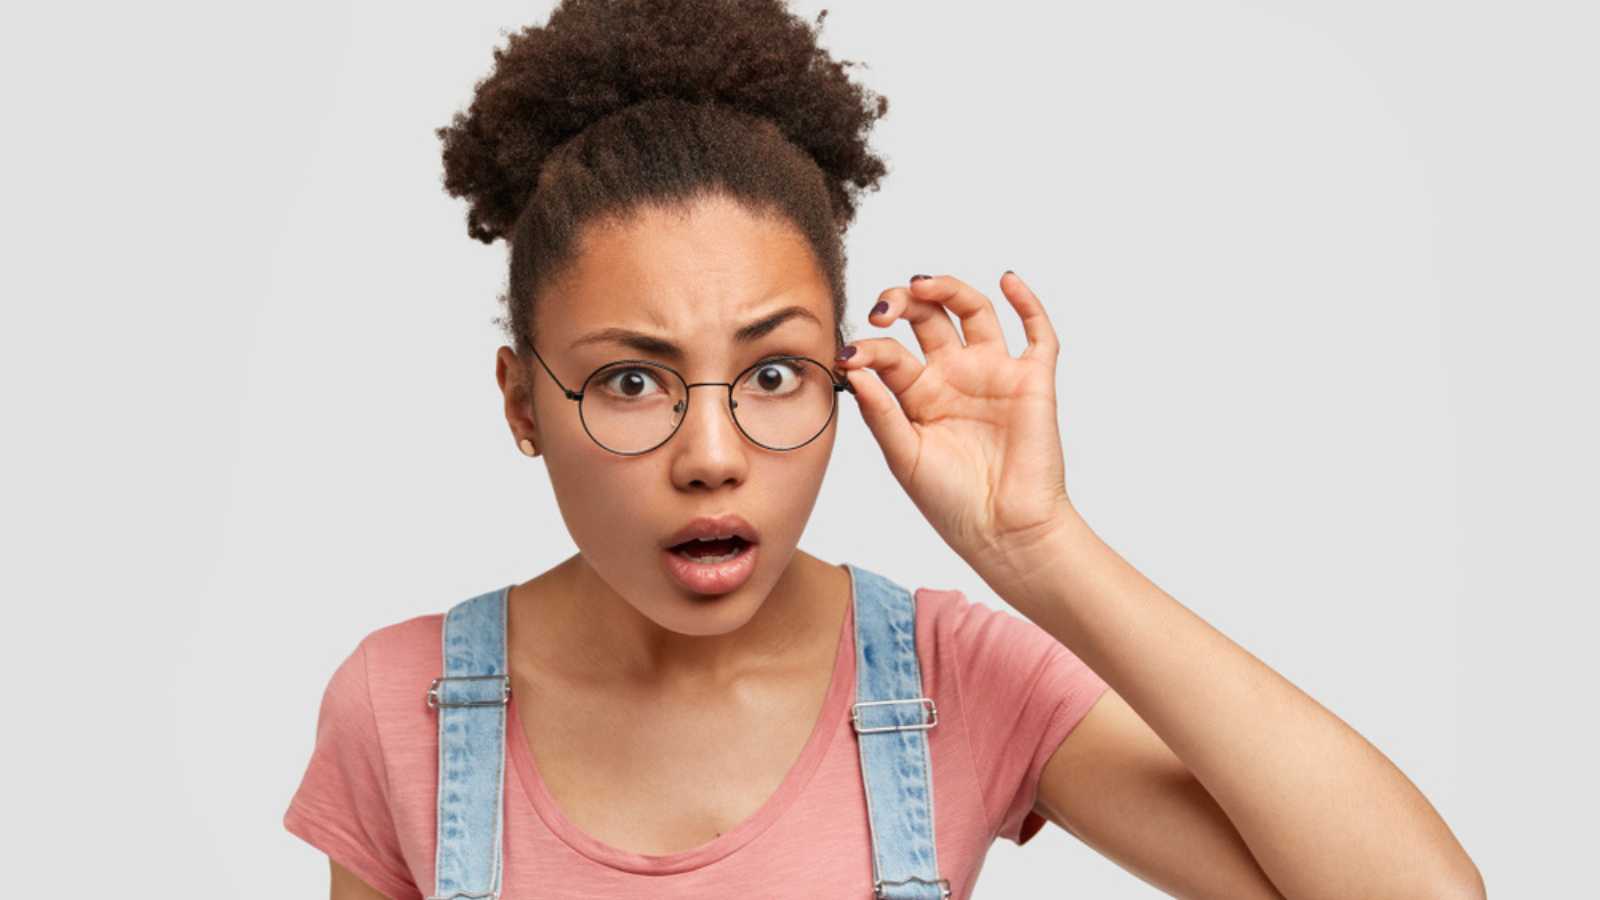 Woman With Glasses Surprised